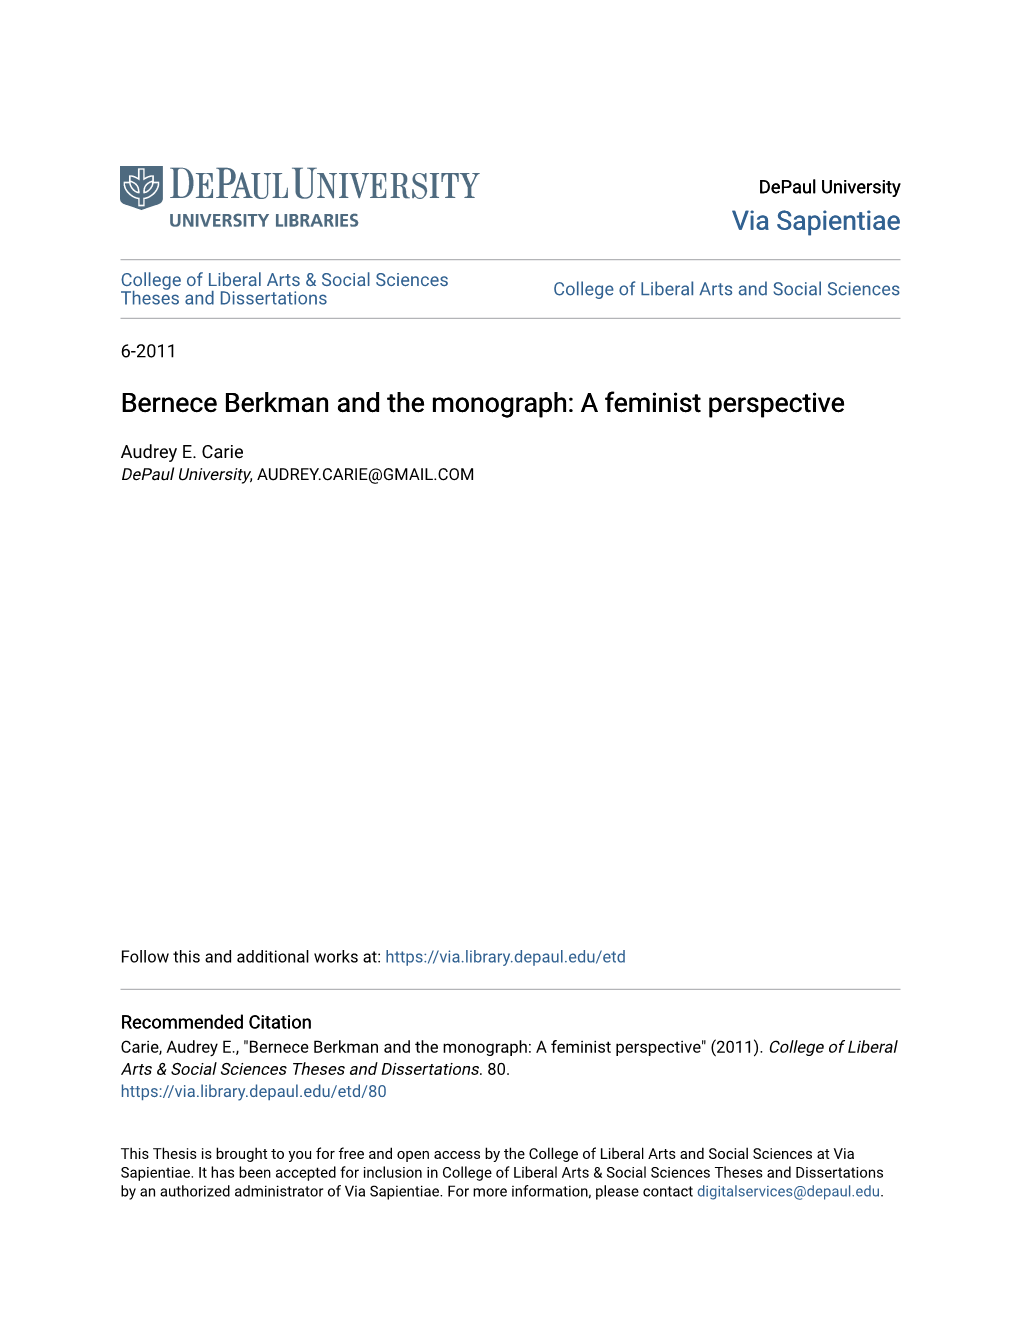 Bernece Berkman and the Monograph: a Feminist Perspective